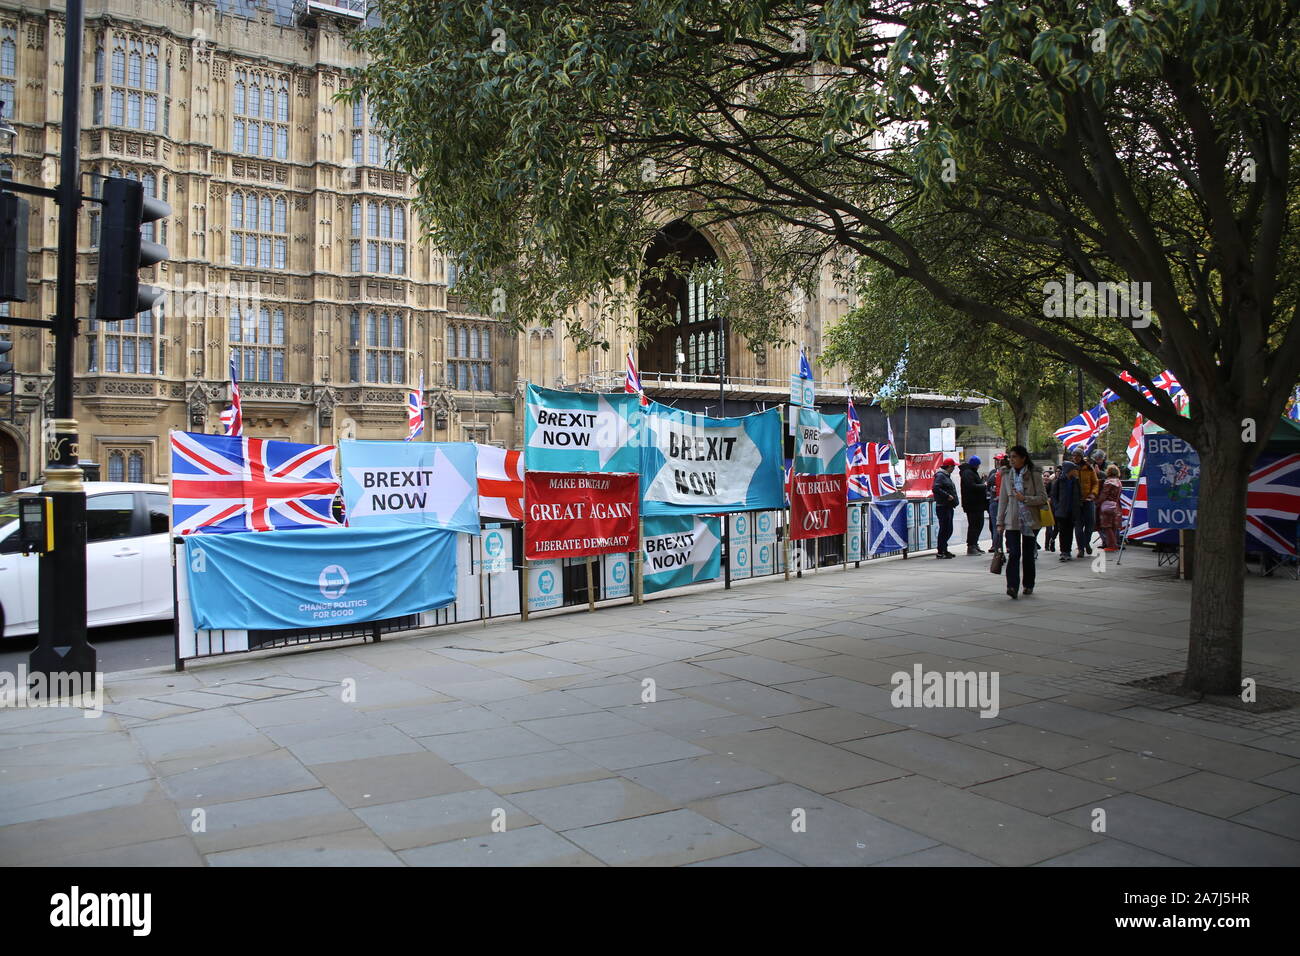 29 October 2019 London pro-Brexit and anti-Brexit flags, banners and campaigners outside the Houses of Parliament, London, UK Stock Photo